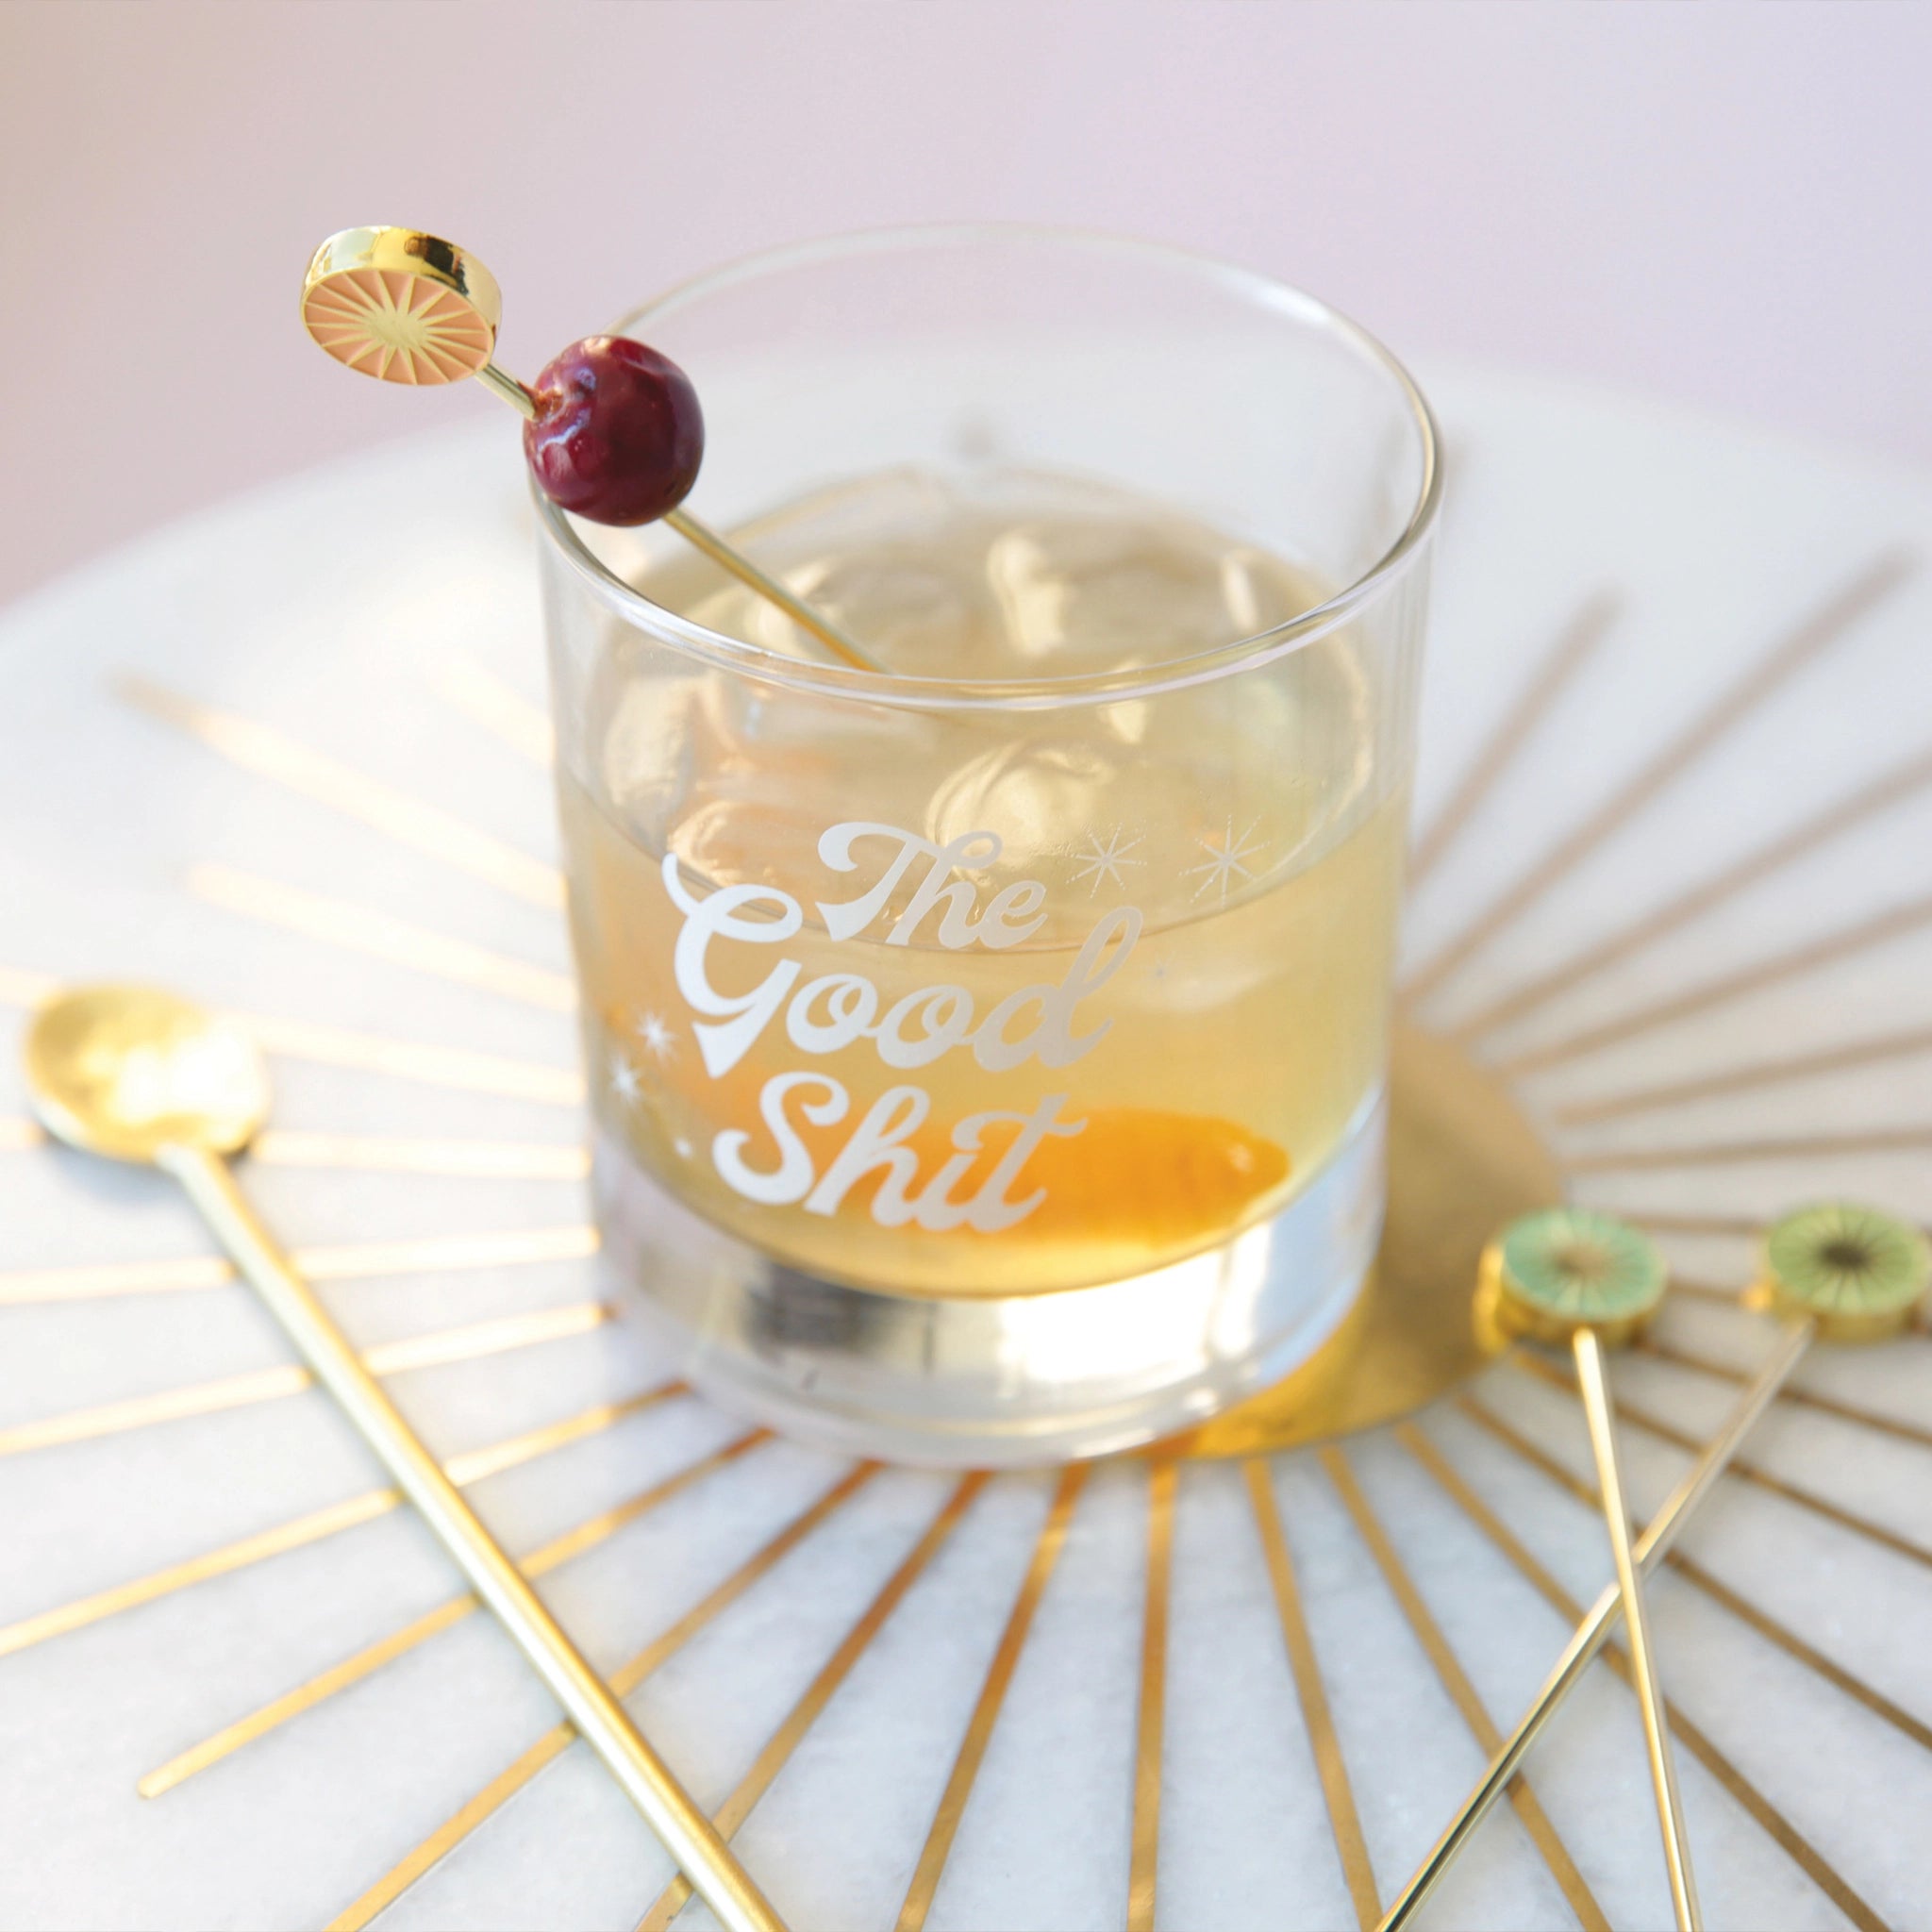 A photograph of a short glass tumbler with a thick bottom and "The Good Shit" printed across the center in white groovy cursive text and staged here with cocktail picks and a cranberry garnish, not included with purchase.